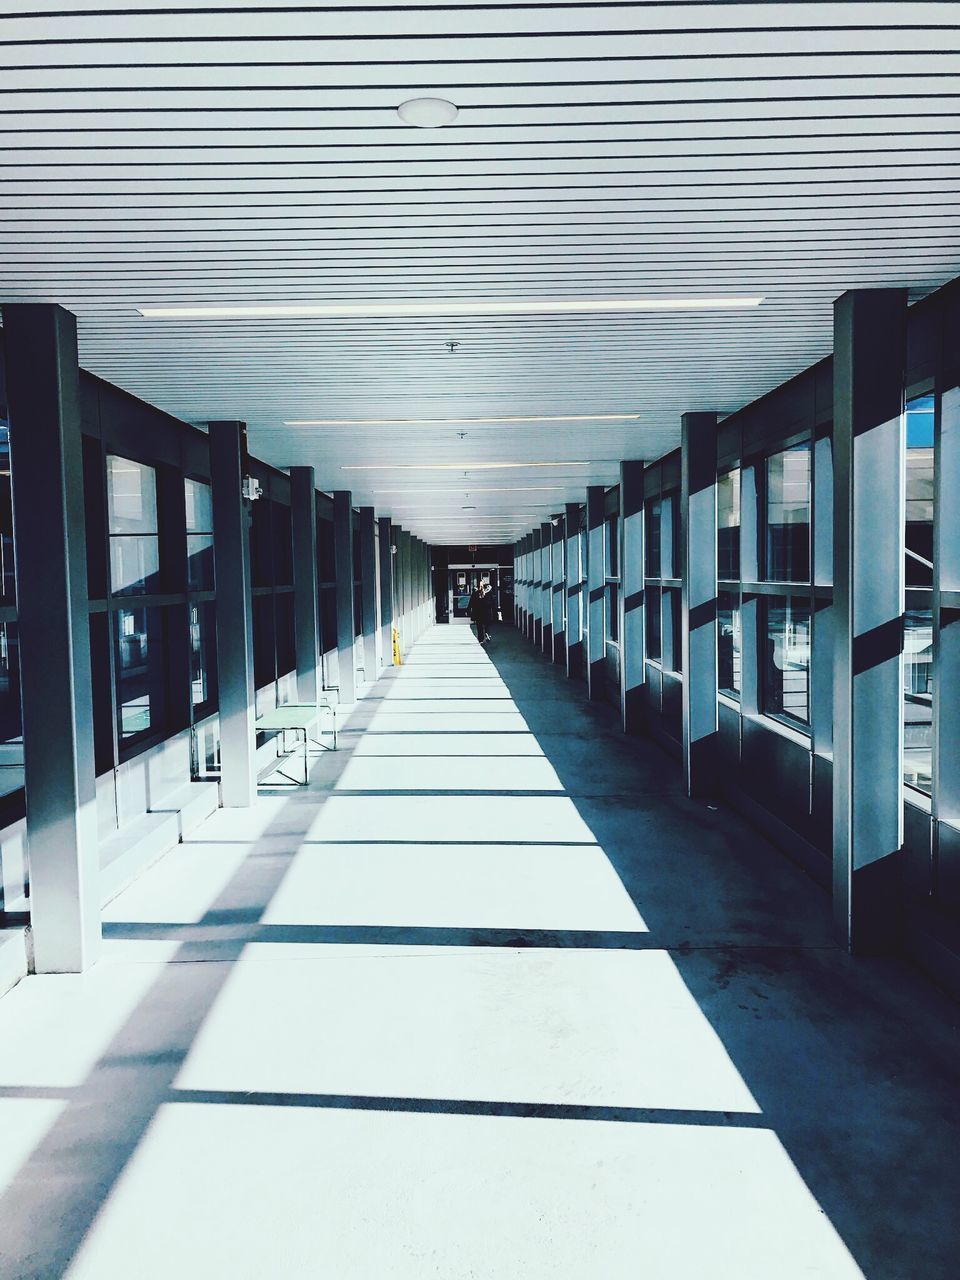 architecture, built structure, direction, the way forward, diminishing perspective, arcade, corridor, indoors, ceiling, no people, building, empty, architectural column, day, in a row, flooring, sunlight, absence, footpath, tiled floor, long, colonnade